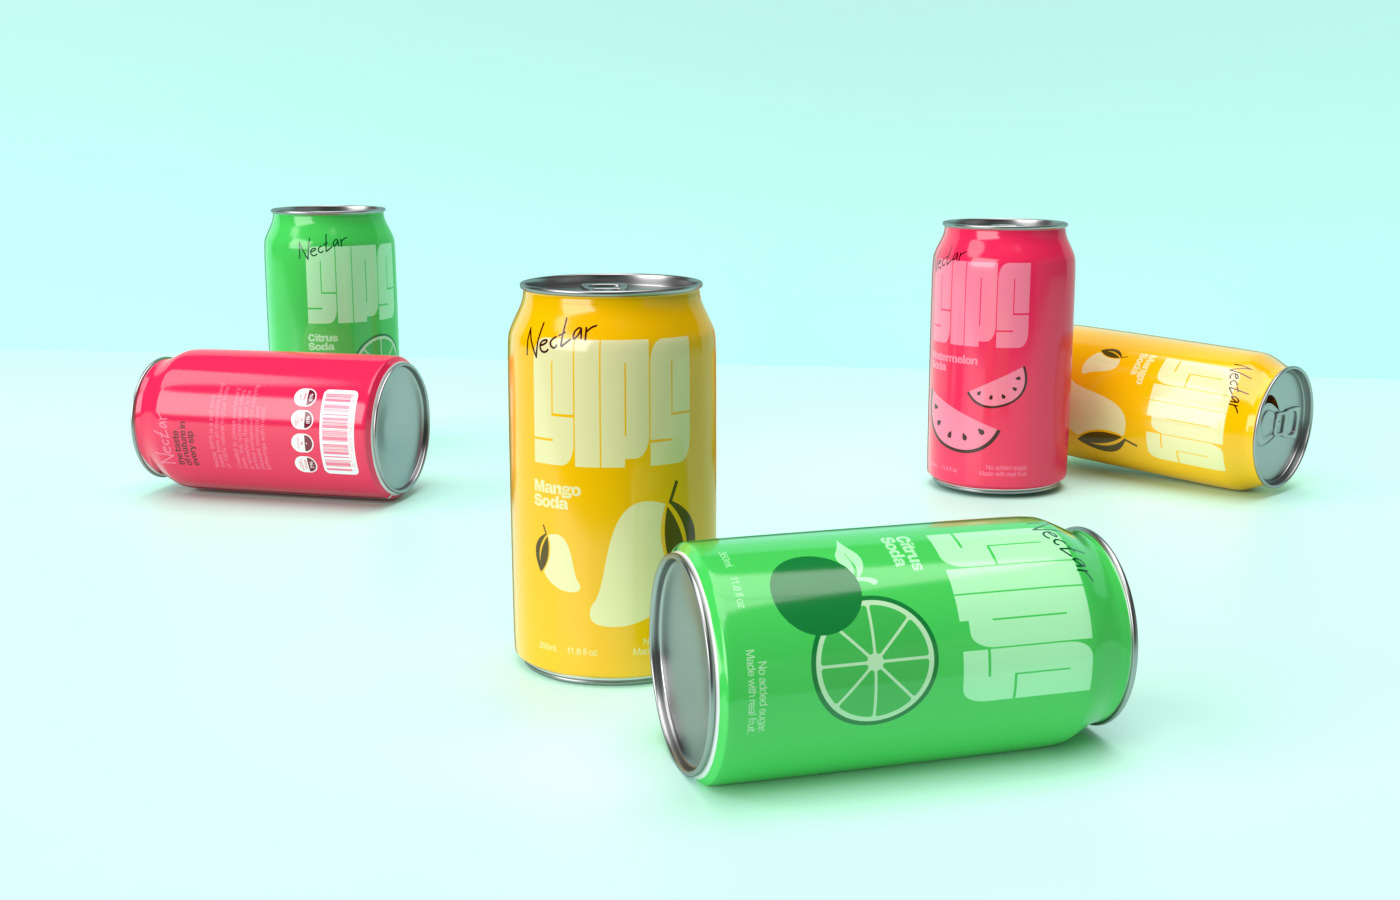 image from the Exploring Bold Flavors with SIPS Soda Packaging Design article on Abduzeedo